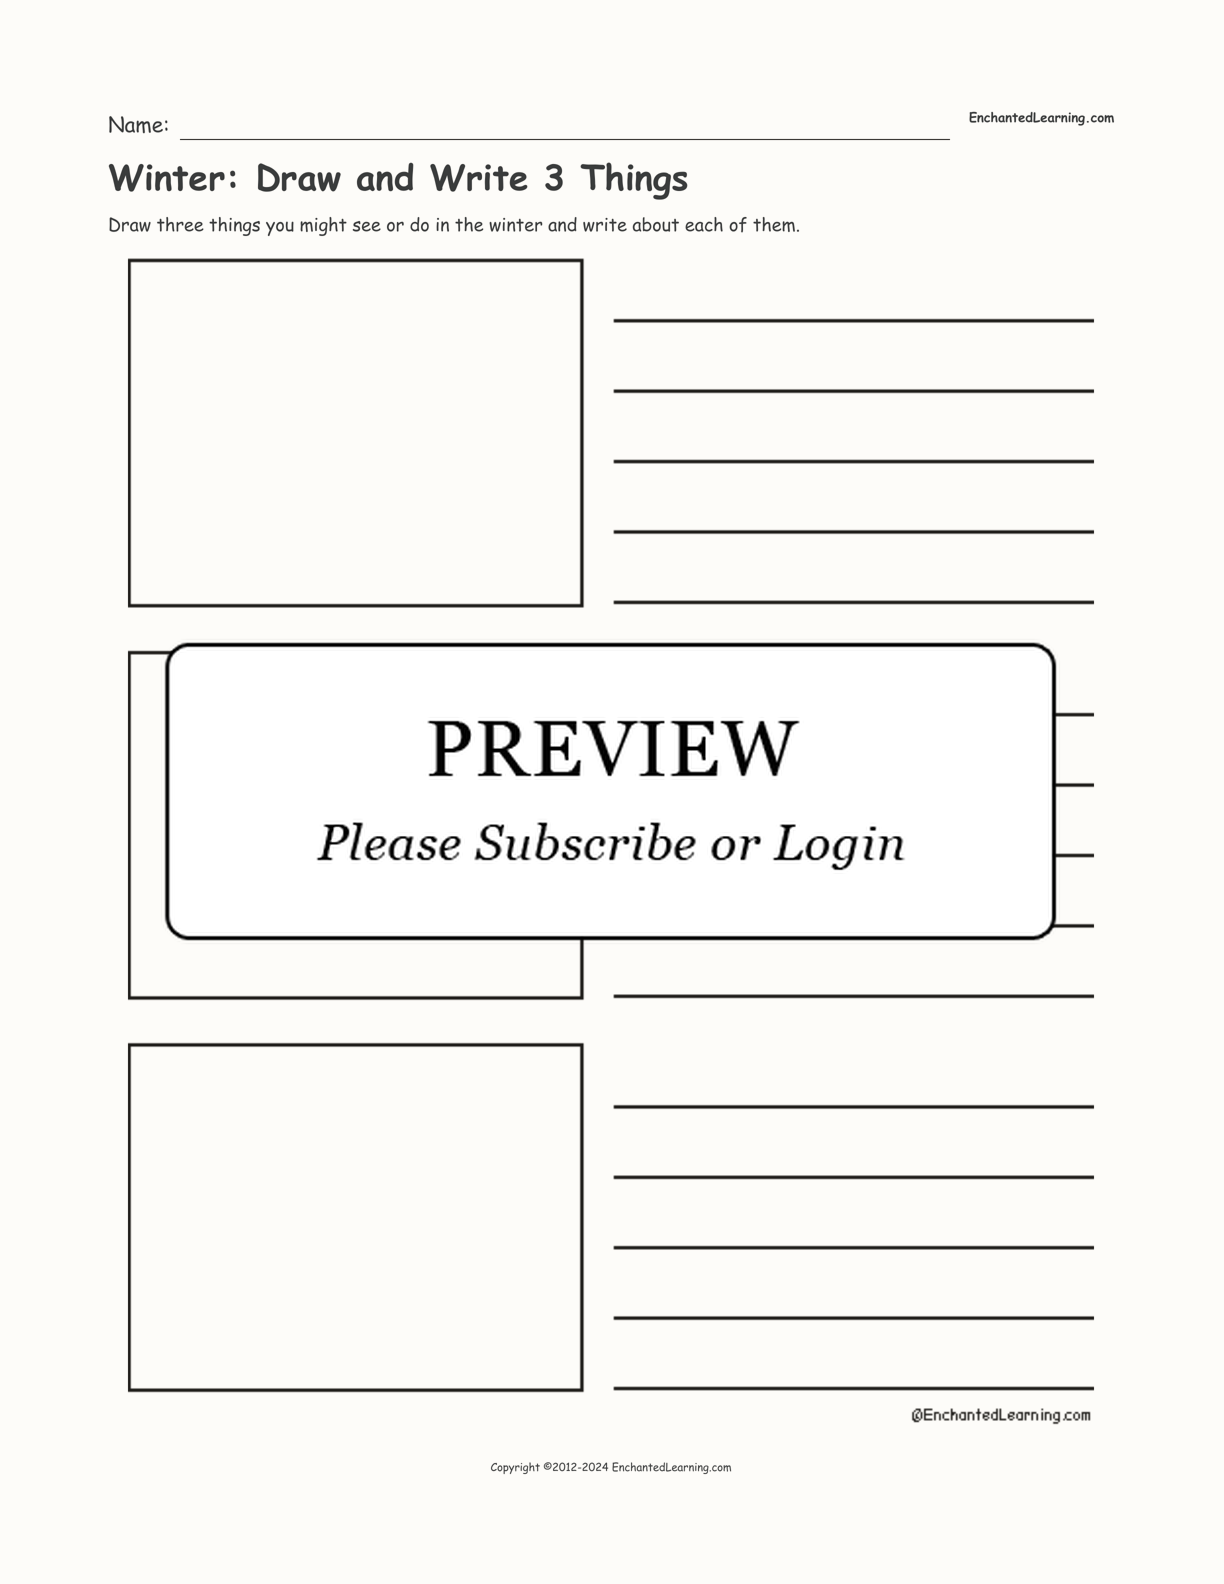 Winter: Draw and Write 3 Things interactive worksheet page 1